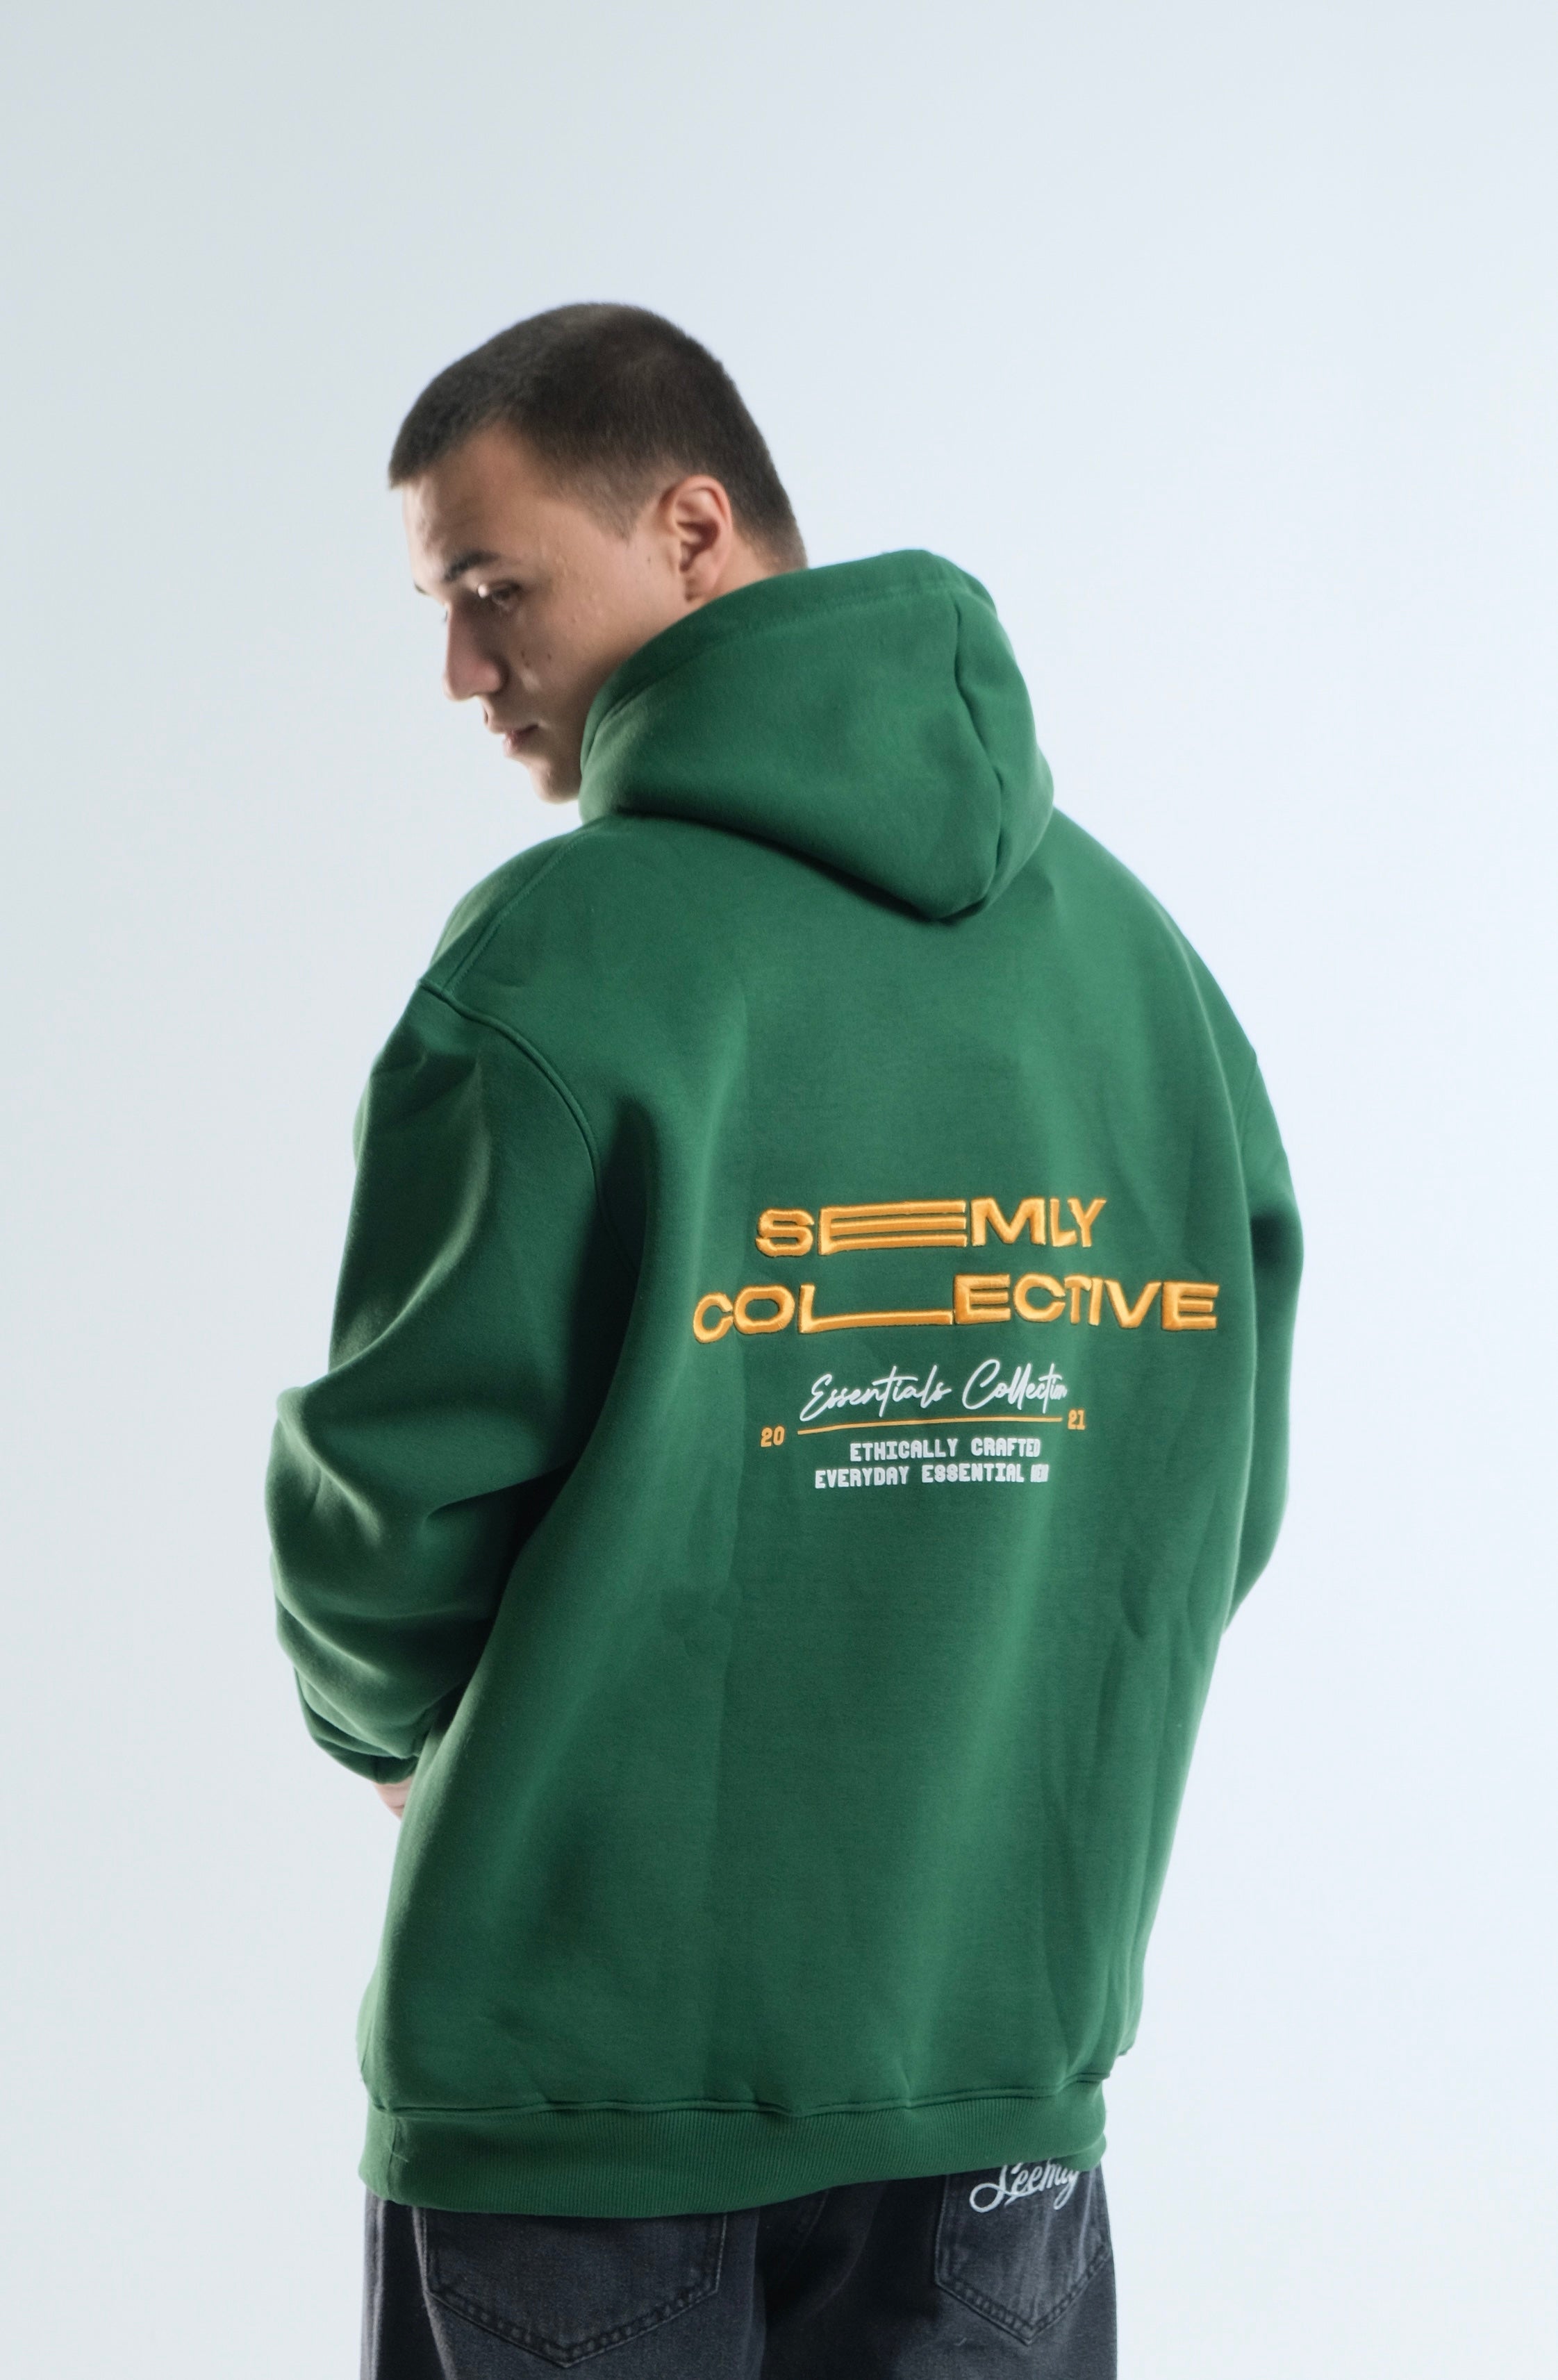 Seemly Collective Green Hoodie